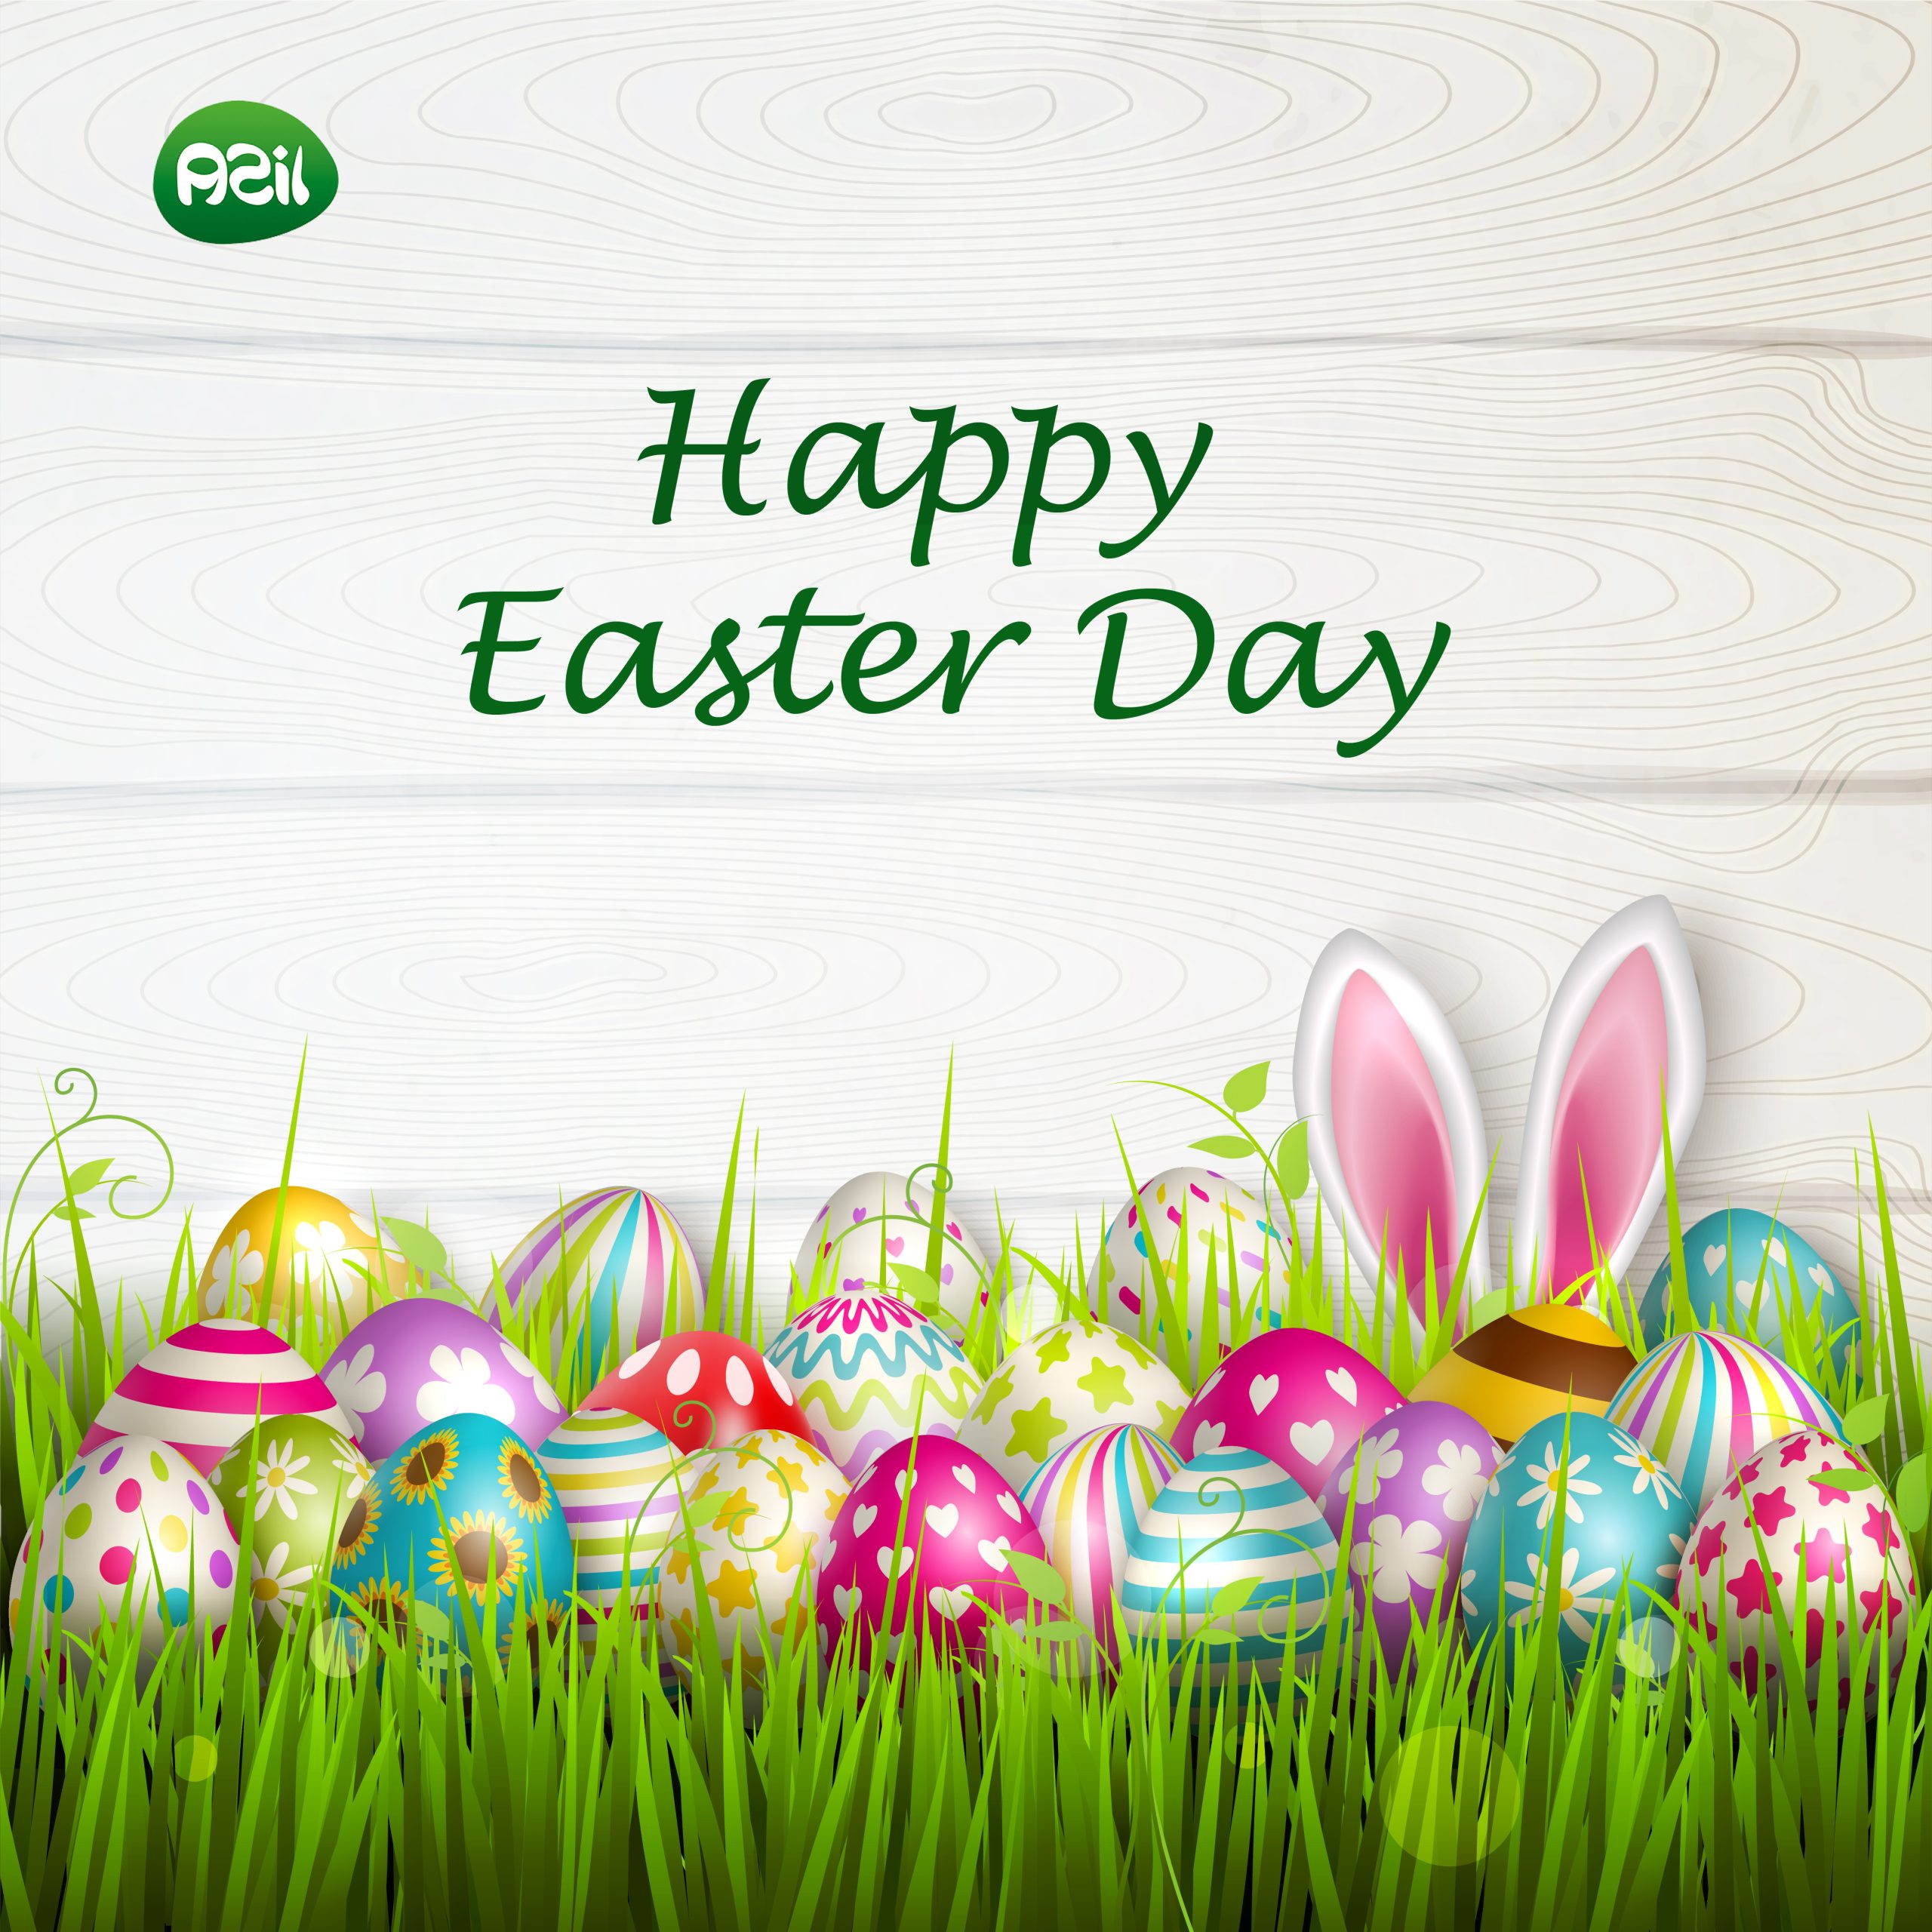 29464 Converted 0۱ scaled - Happy Easter day 2023